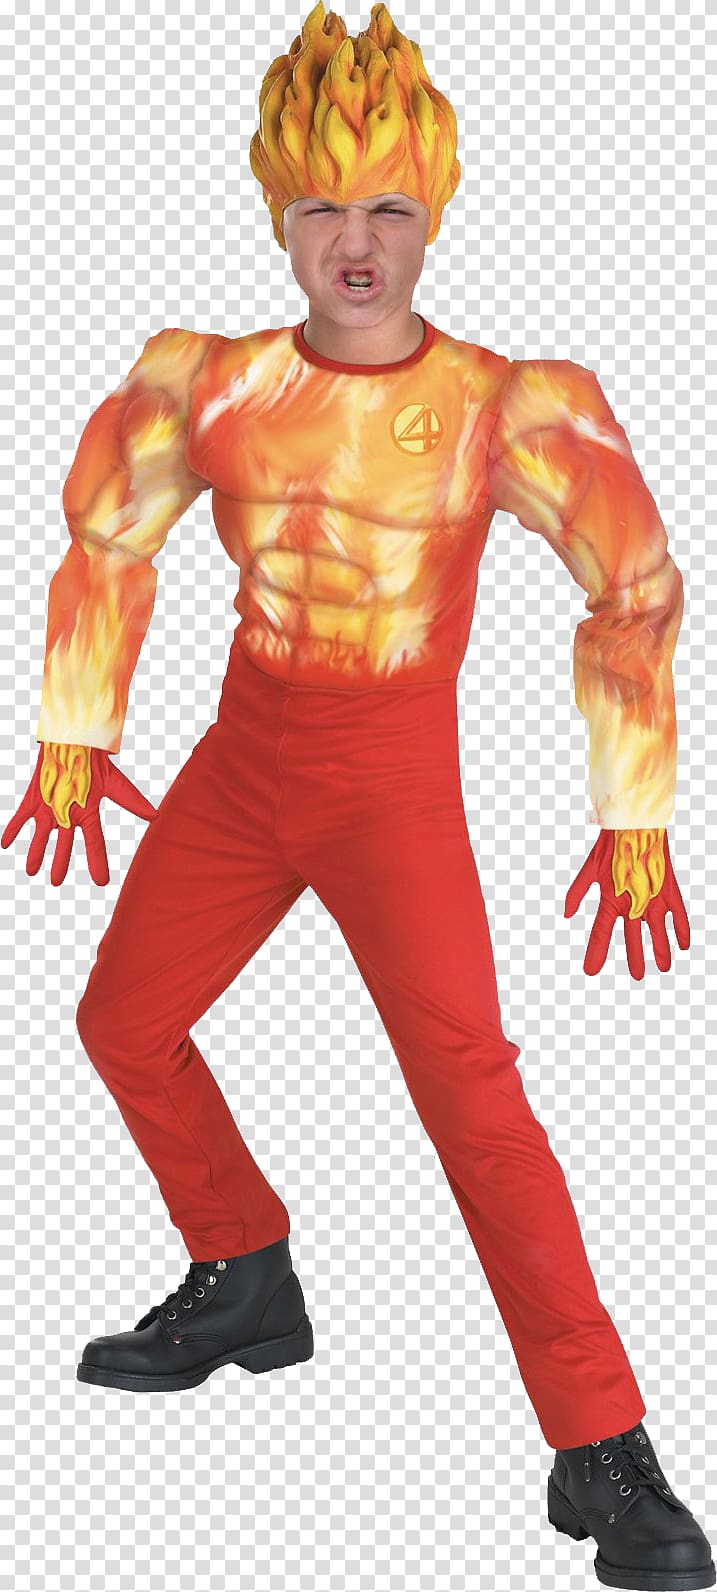 Human Torch Fantastic Four Thing Invisible Woman Costume, Human Torch transparent background PNG clipart